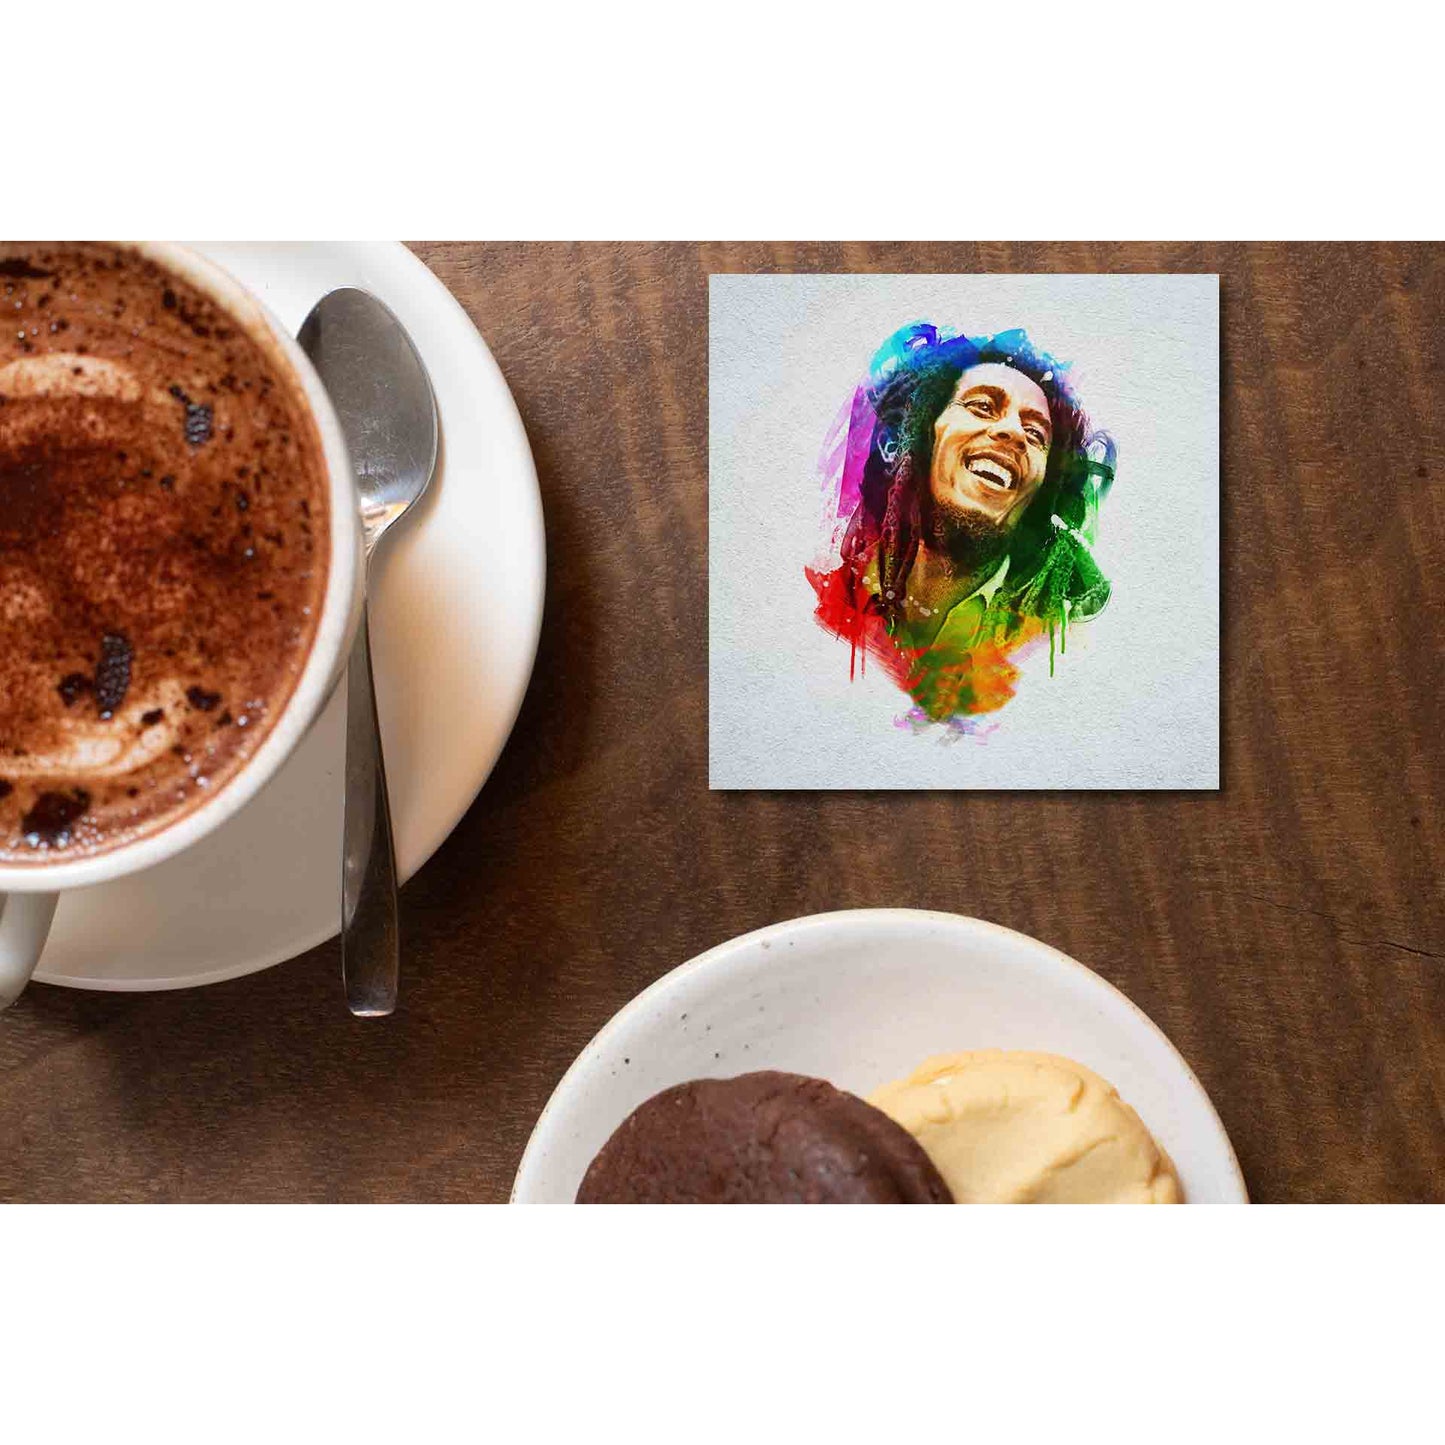 bob marley the pioneer of reggae coasters wooden table cups indian music band buy online india the banyan tee tbt men women girls boys unisex